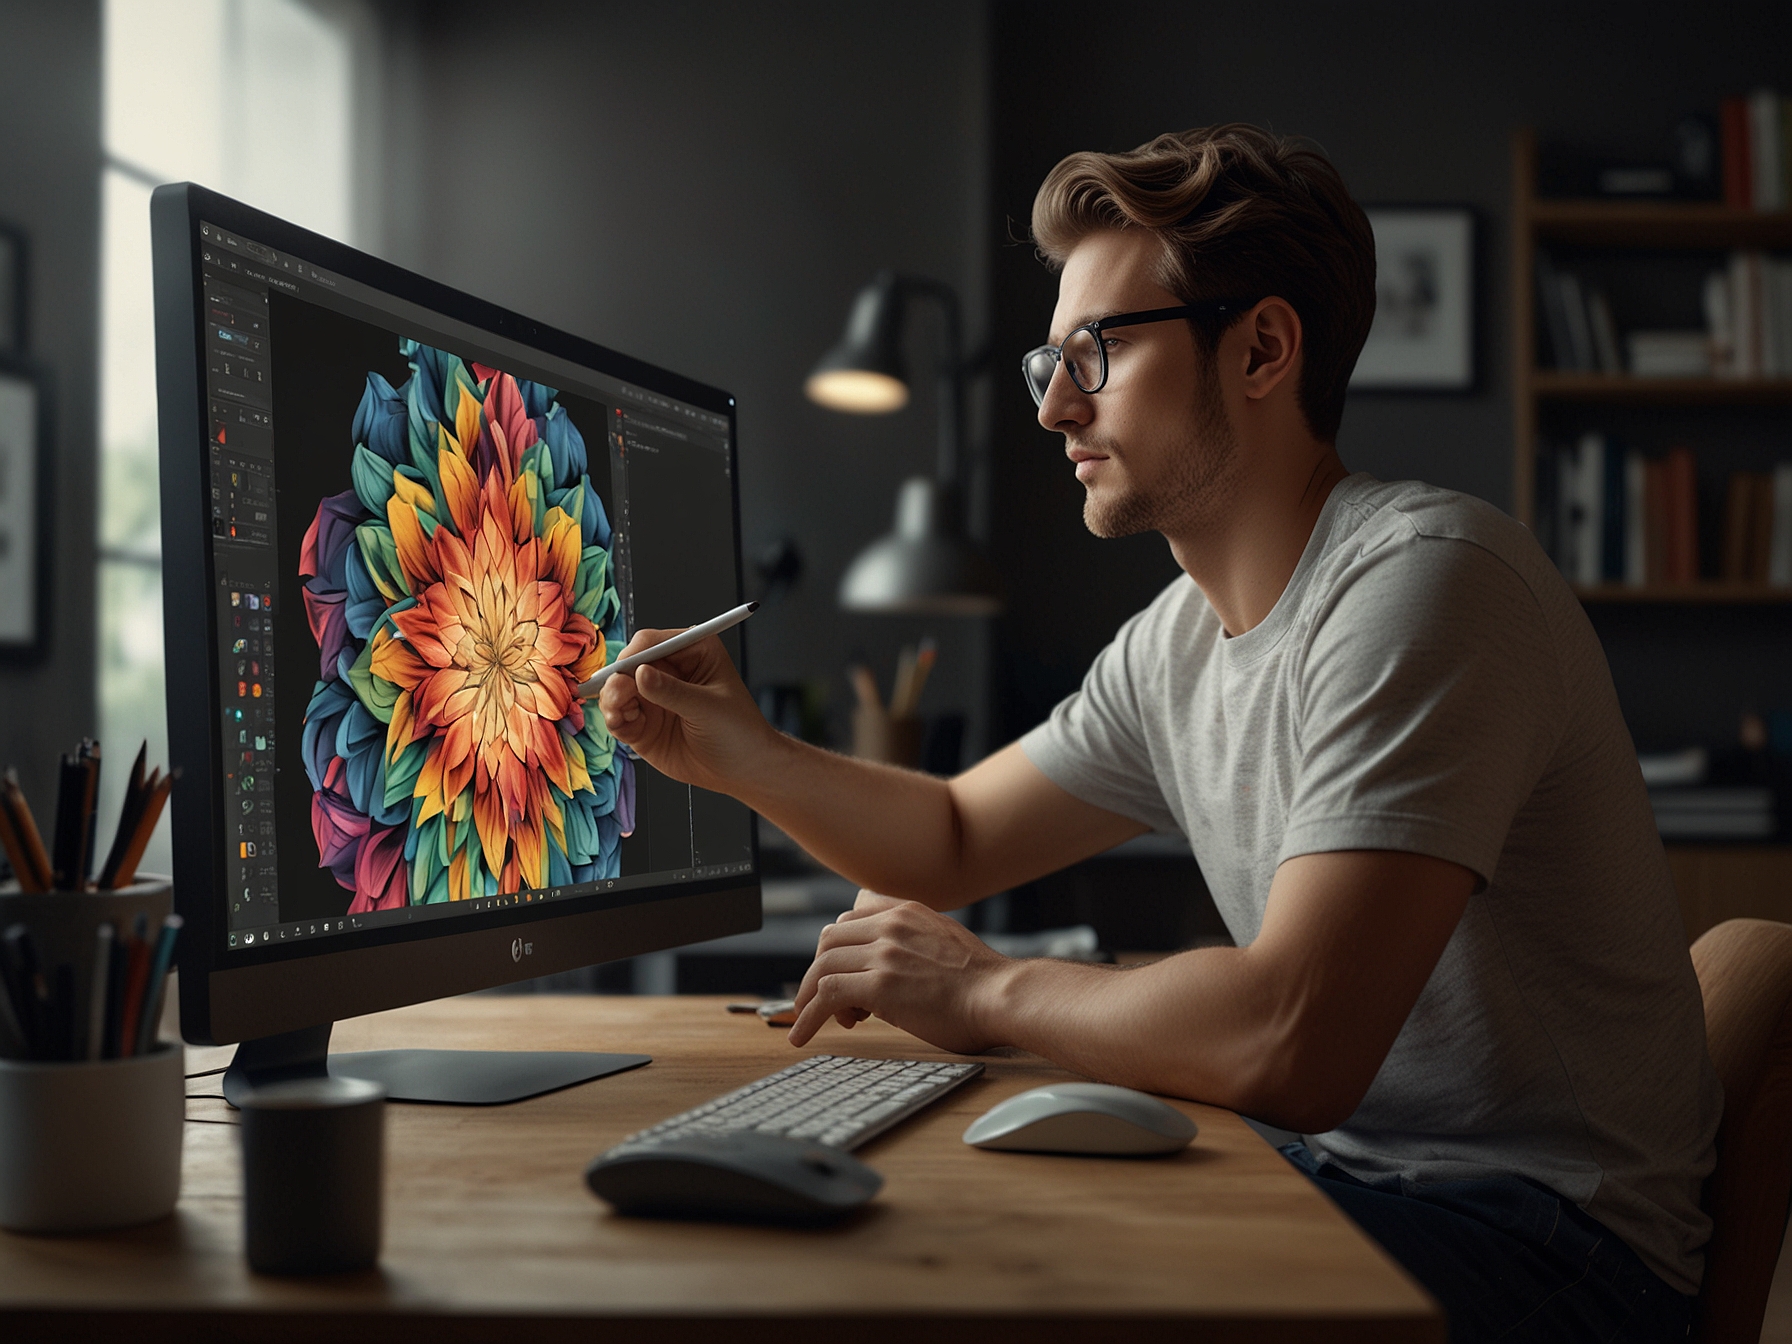 A graphic designer working on a high-resolution LG UltraFine 5K Display, showcasing its 5120 x 2880 resolution and color accuracy, ideal for editing and multimedia tasks.